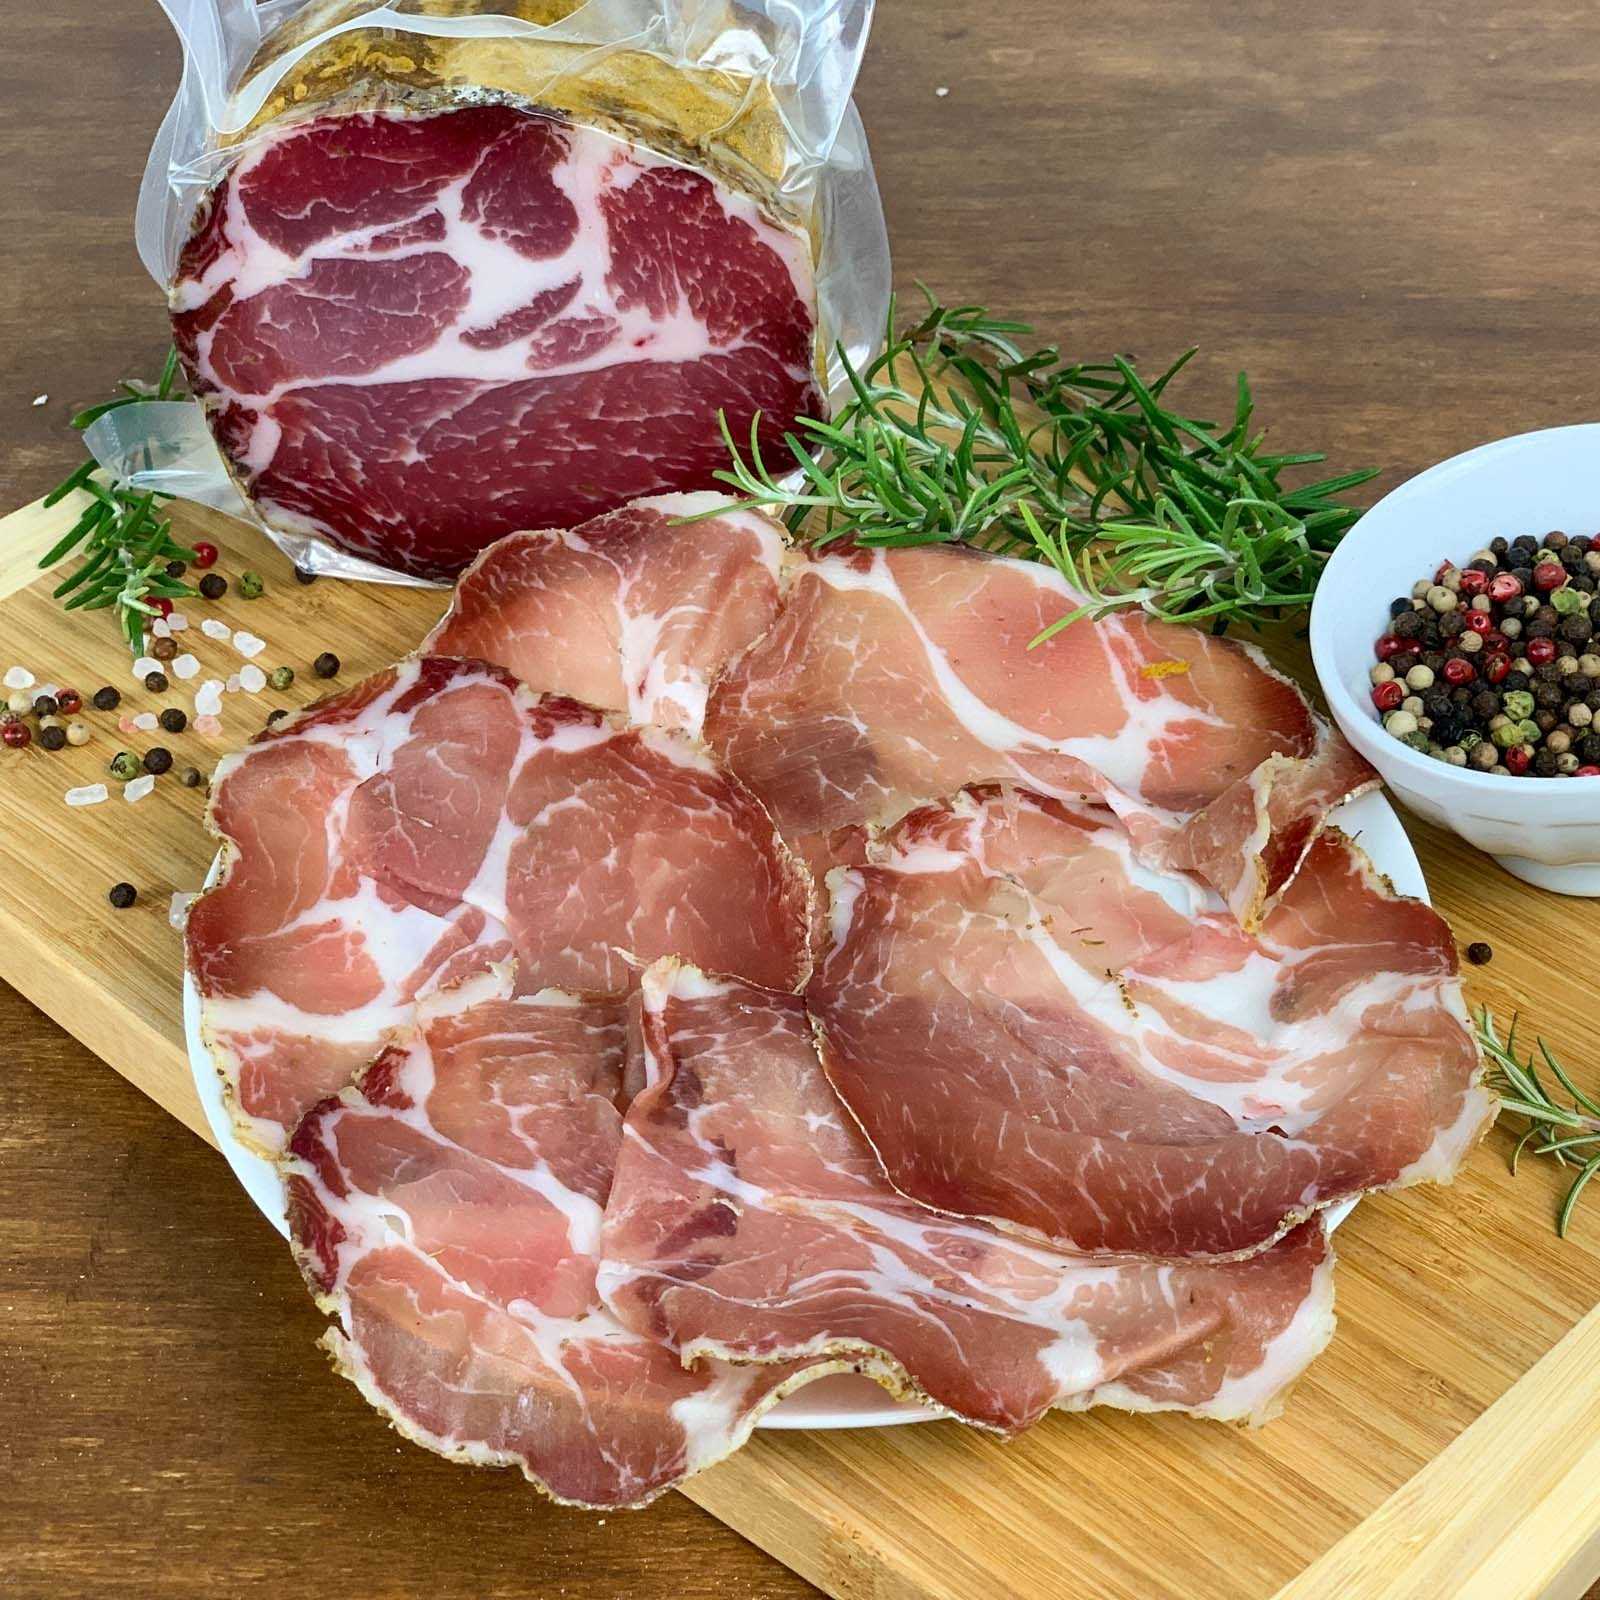 Tuscan Capocollo, also known by the name of Coppa, is a seasoned salami that derives from the artisanal processing of first choice national pork, carried out in compliance with ancient traditional techniques. It is characterized by a sweet and spicy taste, while its scent recalls the hint of spices and aromatic herbs.